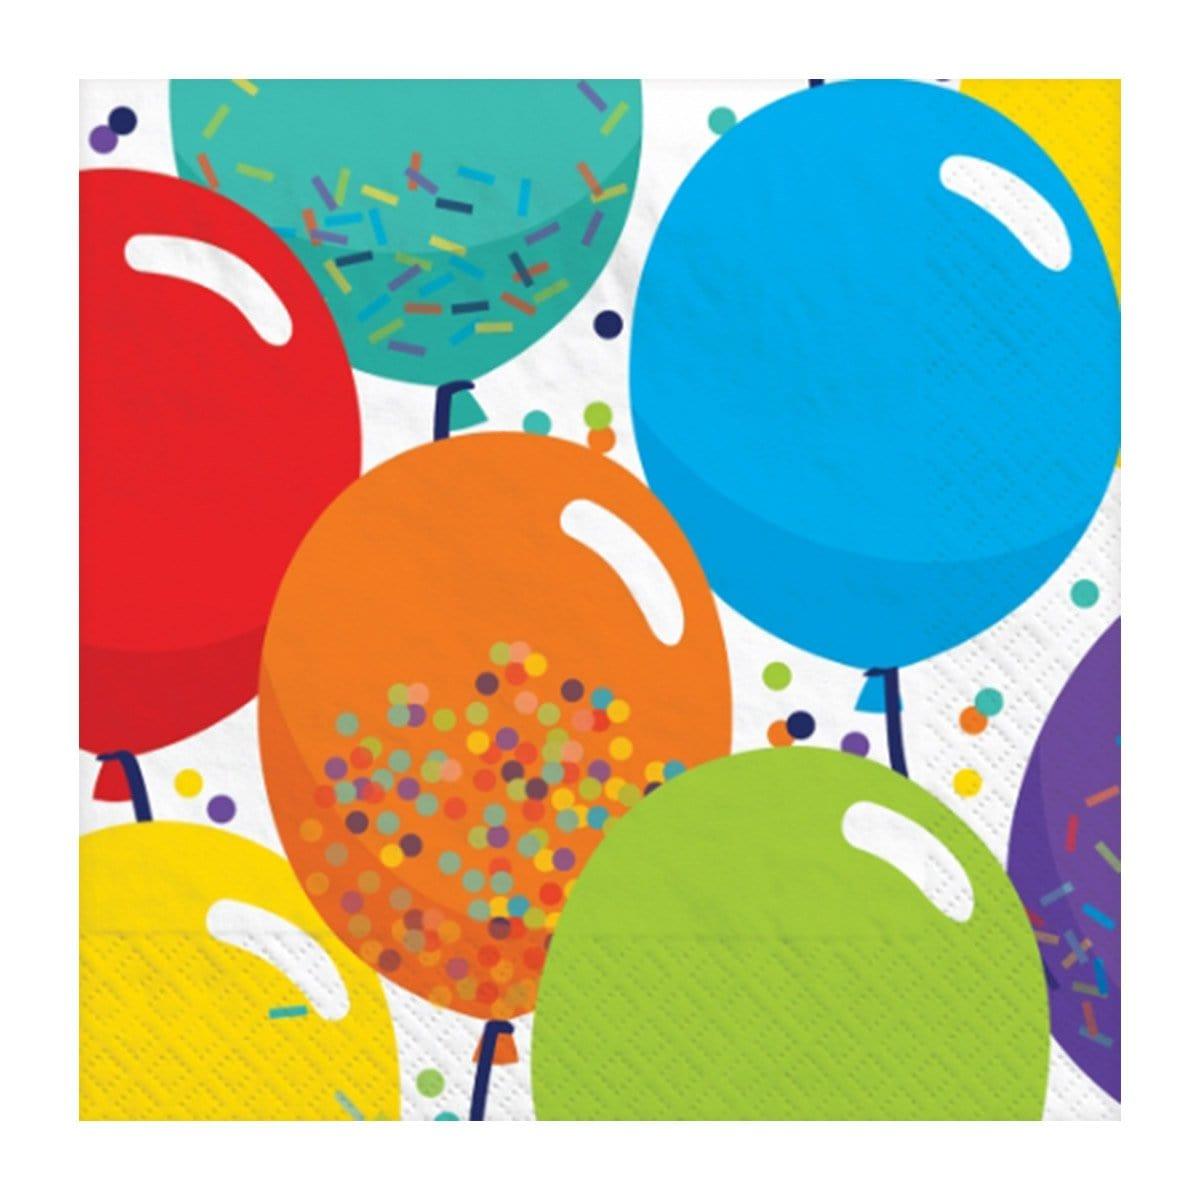 Buy General Birthday Bonne Fête Balloons - Beverage Napkins, 16 Count sold at Party Expert